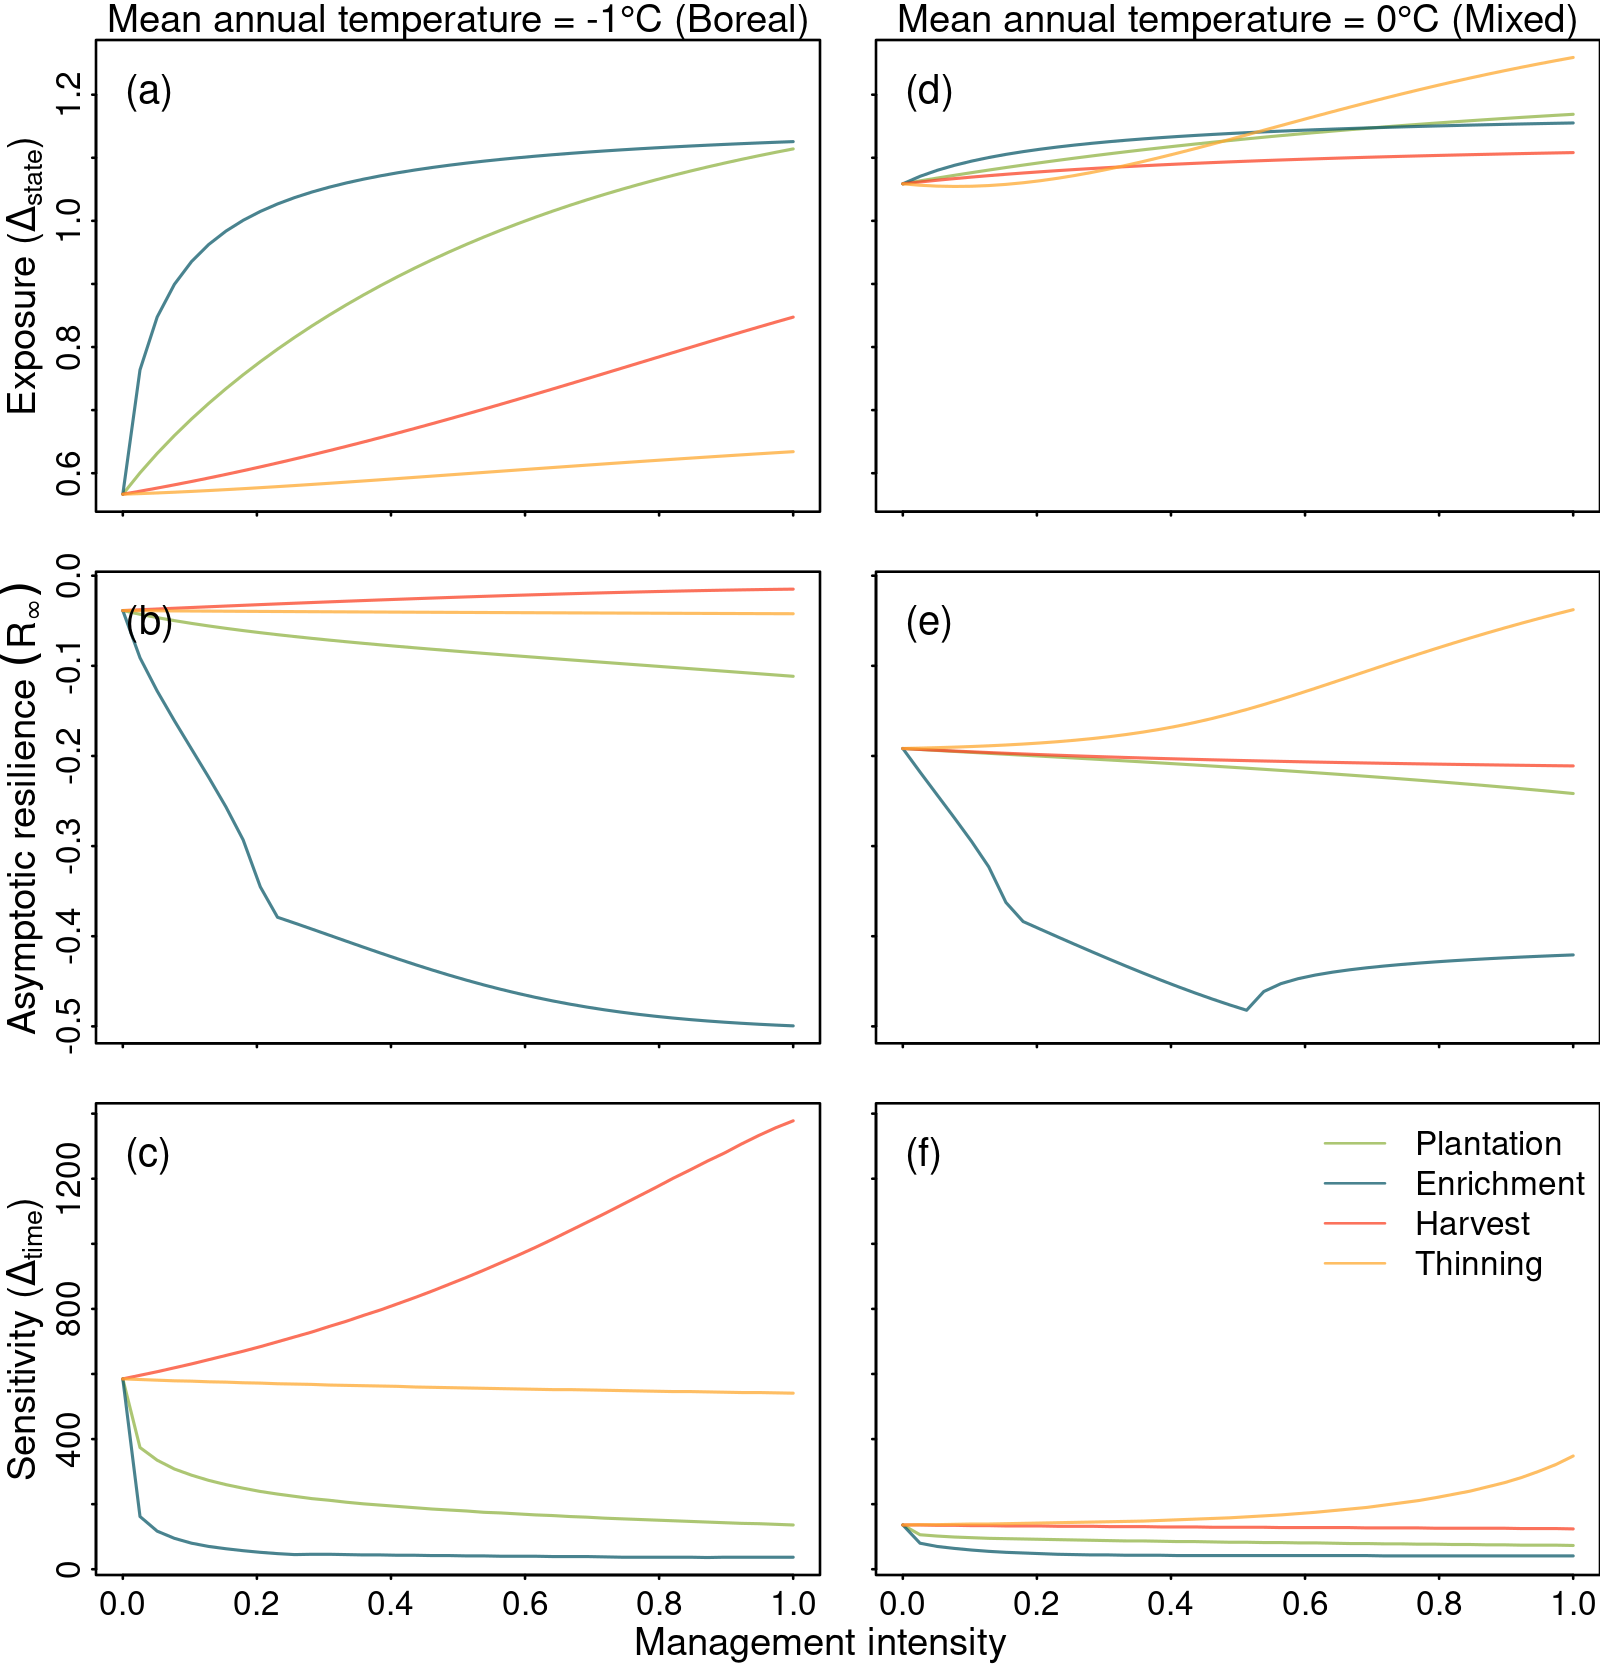 Figure 4: Effect of increasing management intensity on the transient metrics characterizes how the model responds to climate warming (RCP4.5). The effect of increasing management intensity is observed on two specific climate conditions represented by the initial mean annual temperature: -1 (dominated by boreal; left panels) and 0 (boreal/mixed state ecotone; right panels) regions. Transient dynamics are described by (i) exposure or the shift of forest states to the new equilibrium; (ii) asymptotic resilience or the rate at which the system recovers to equilibrium; and (iii) sensitivity or the time for the state to reach equilibrium after climate warming. Details on each metric are described in Figure 3